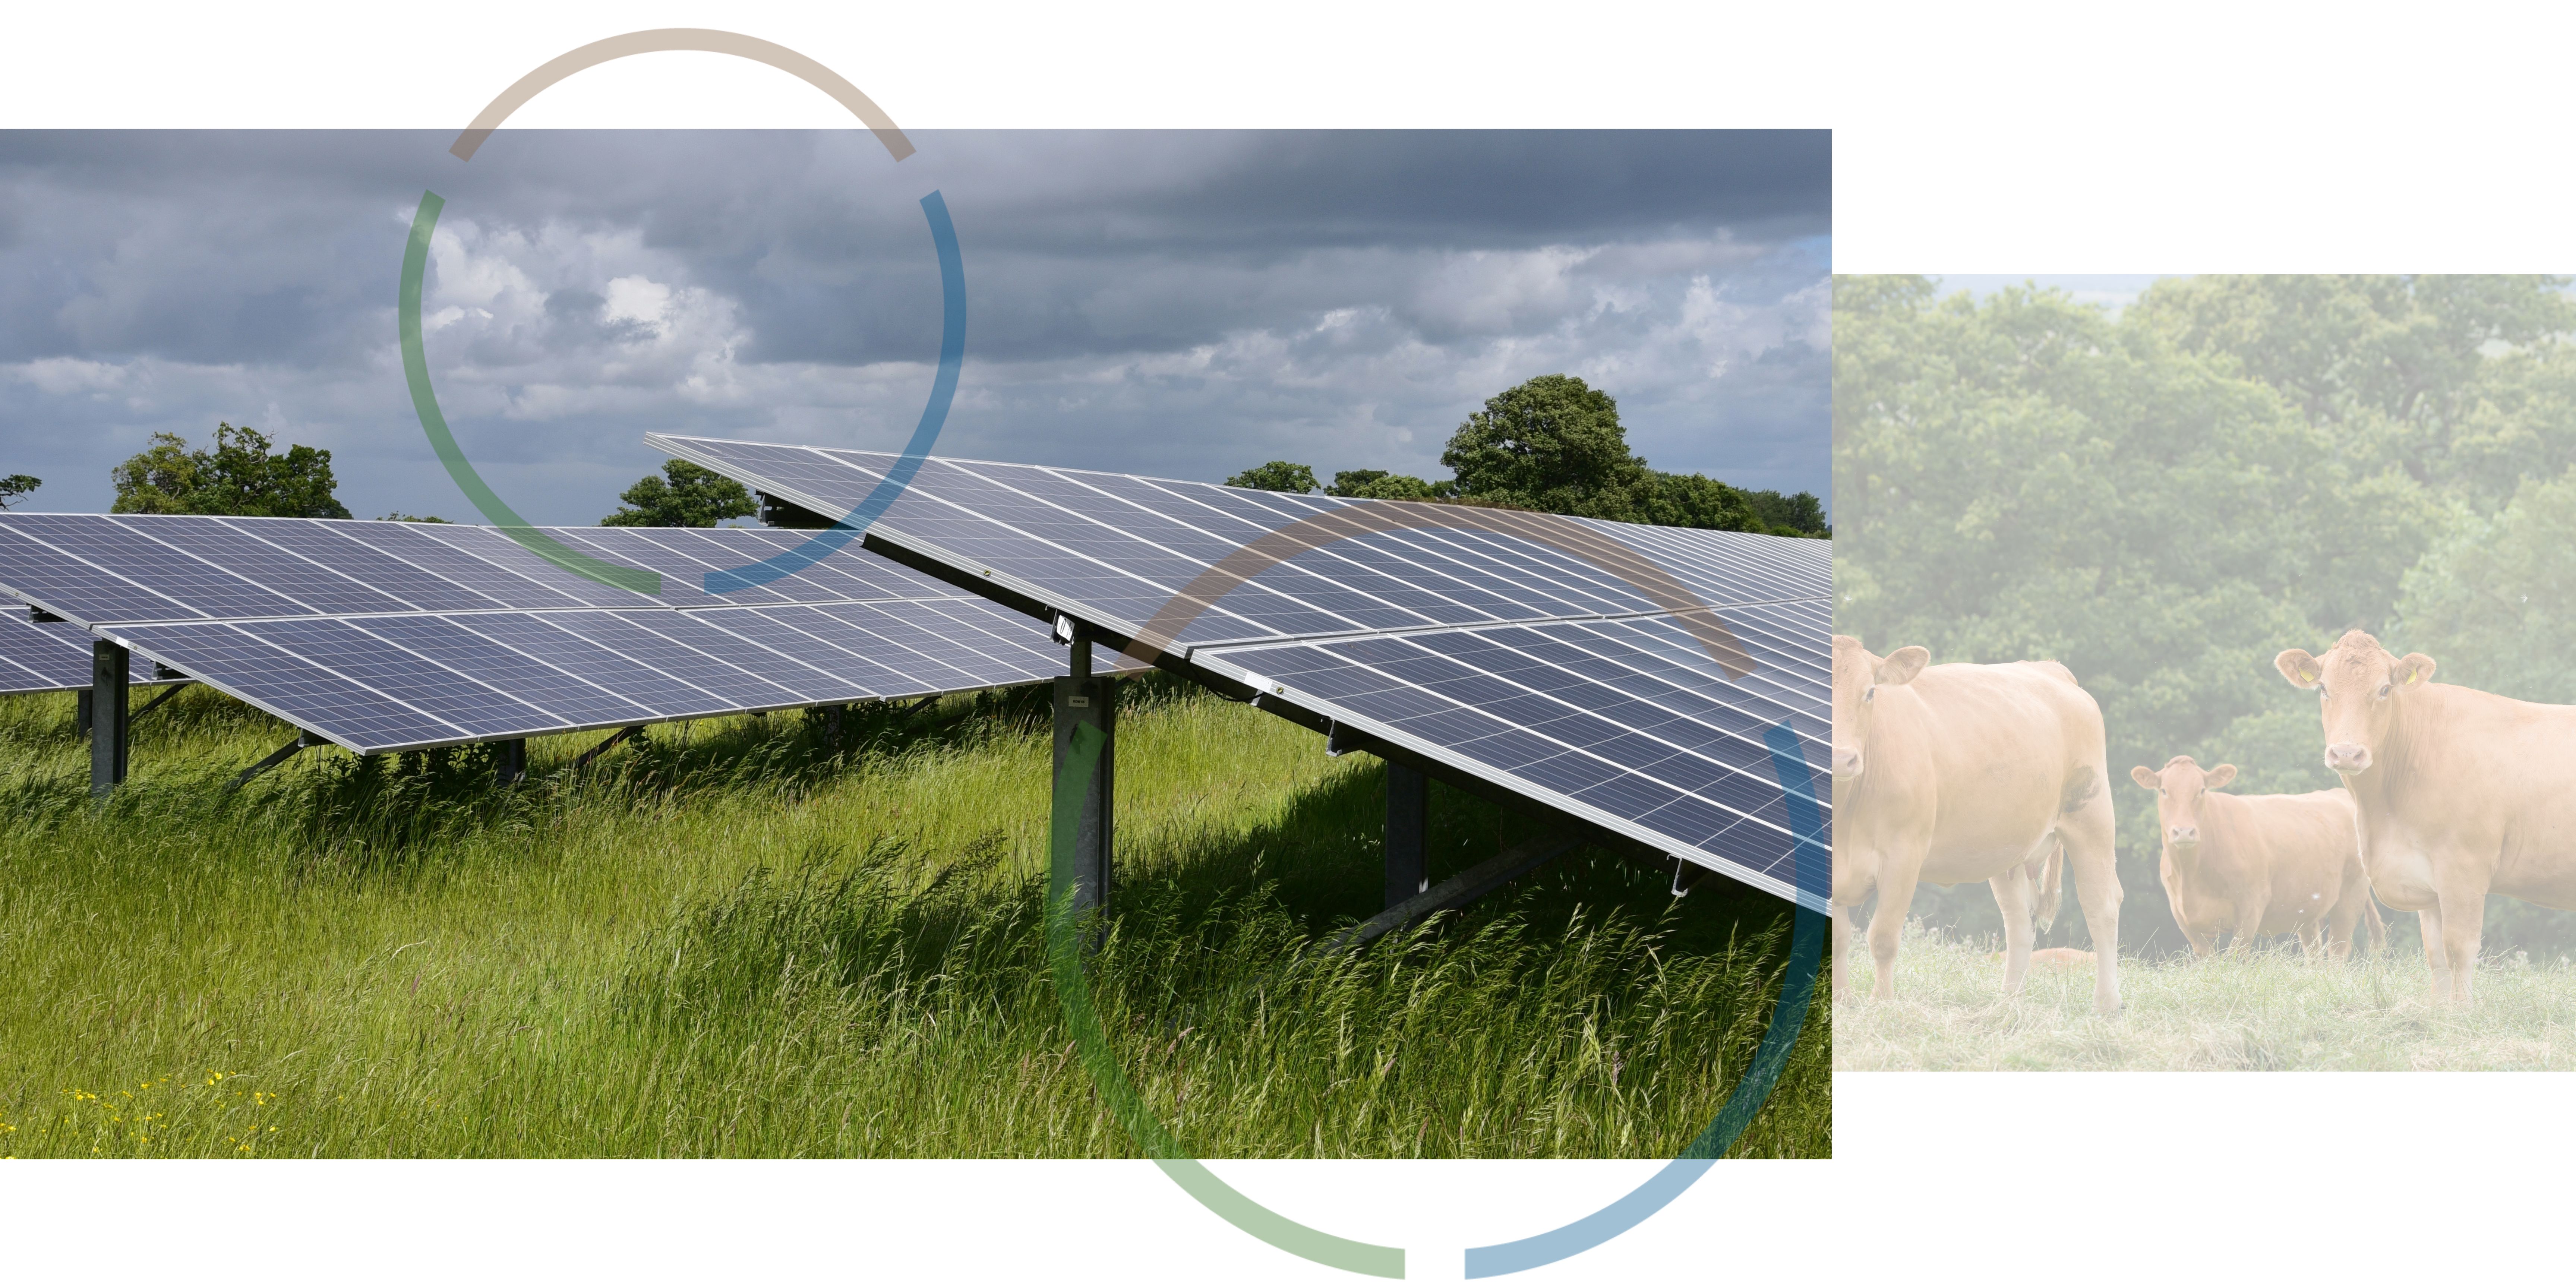 An image of solar panels next to an image of cows in a field.